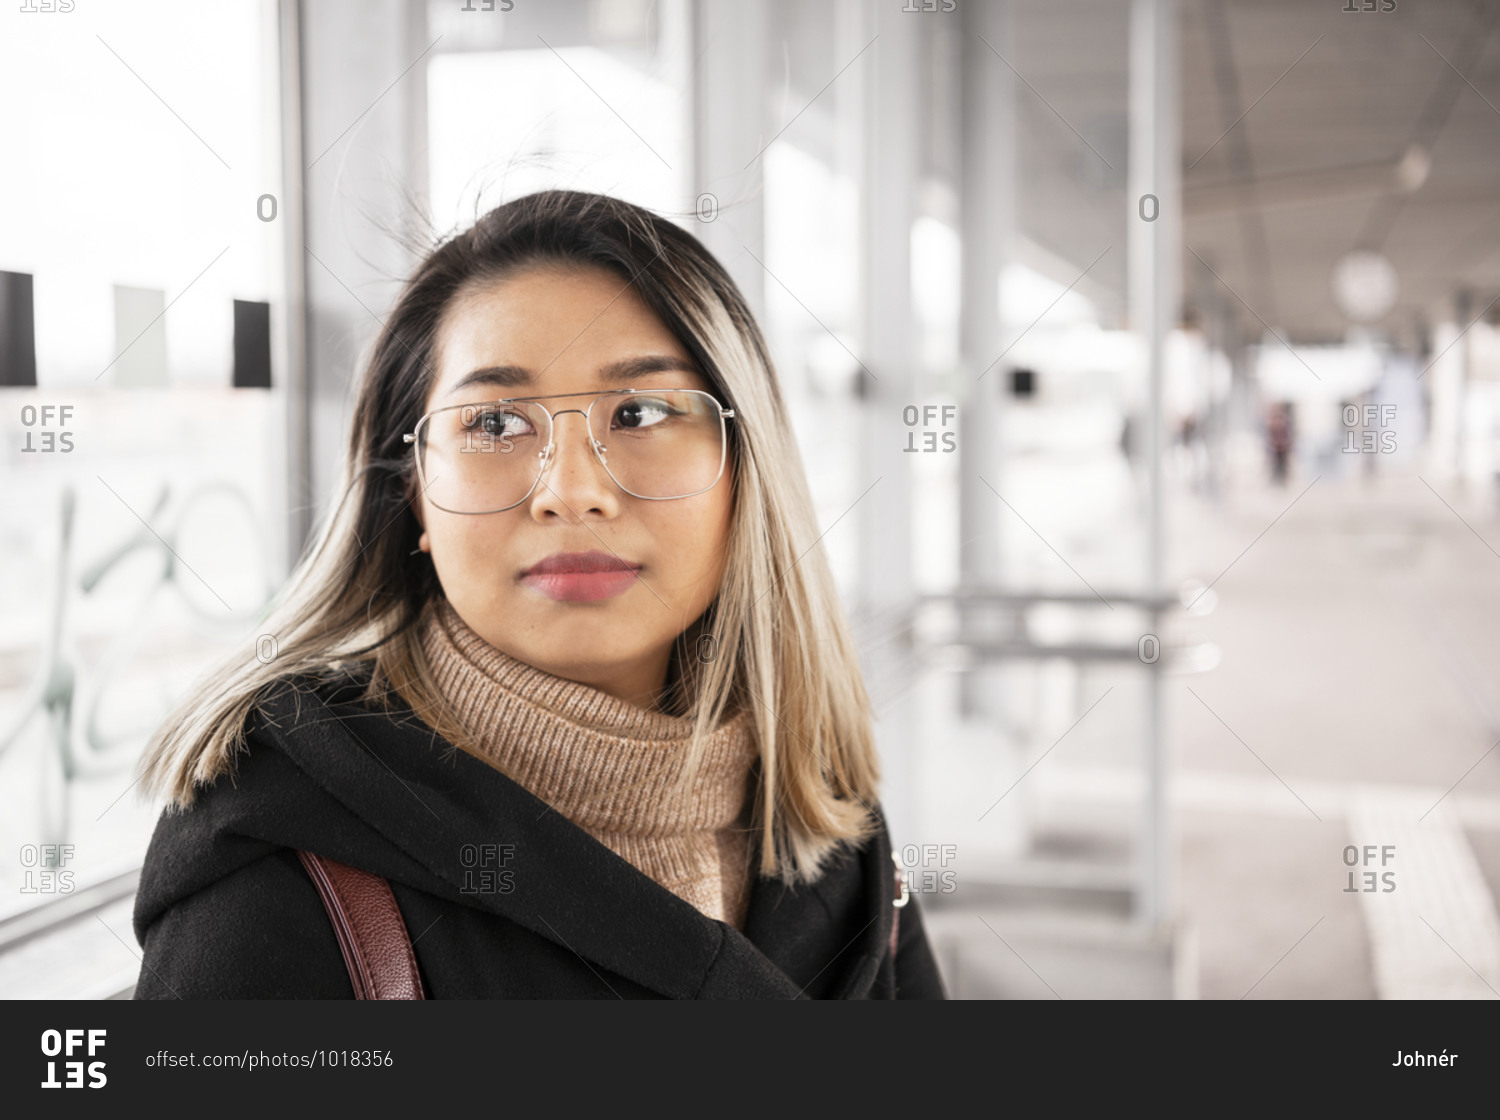 Woman at a train station